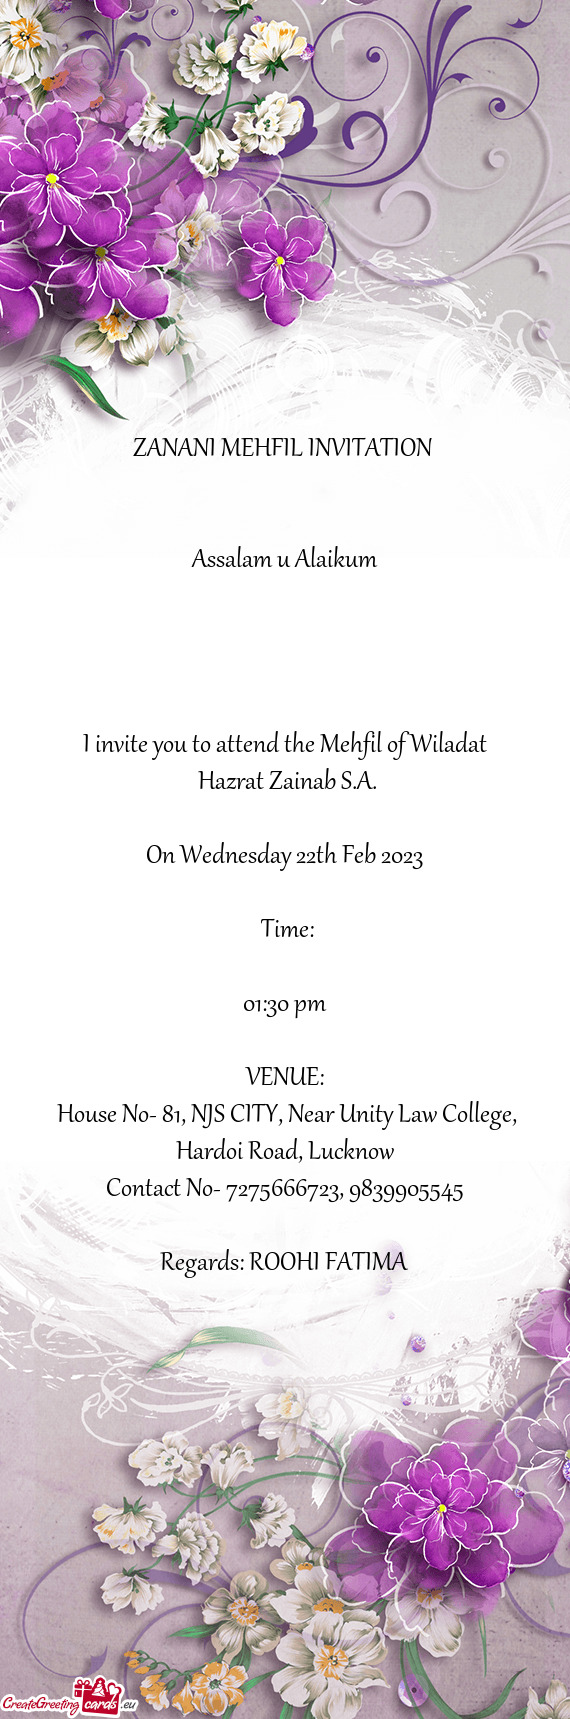 I invite you to attend the Mehfil of Wiladat